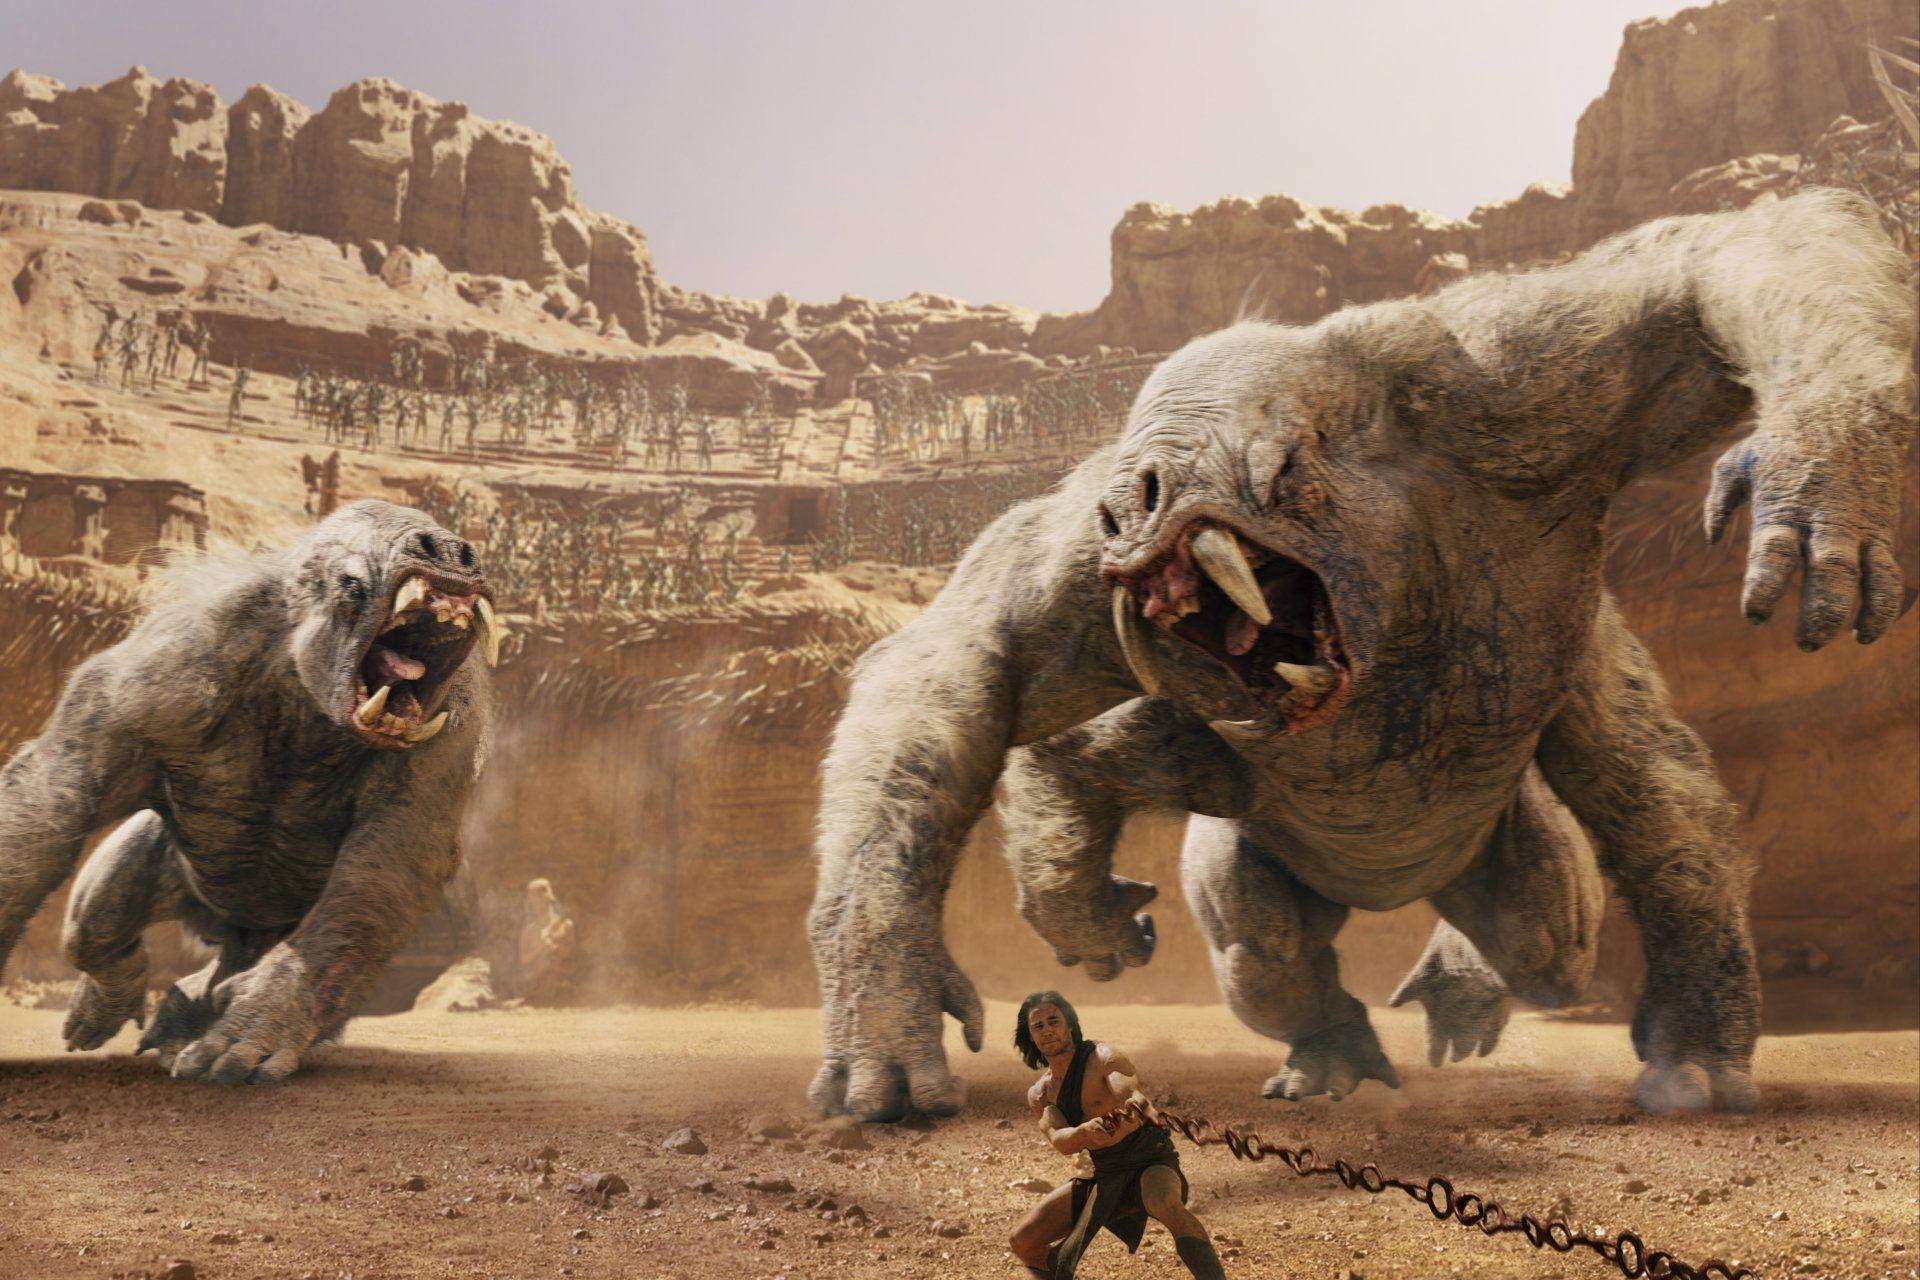 John Carter Confronting Huge Primates In A Mysterious World Background